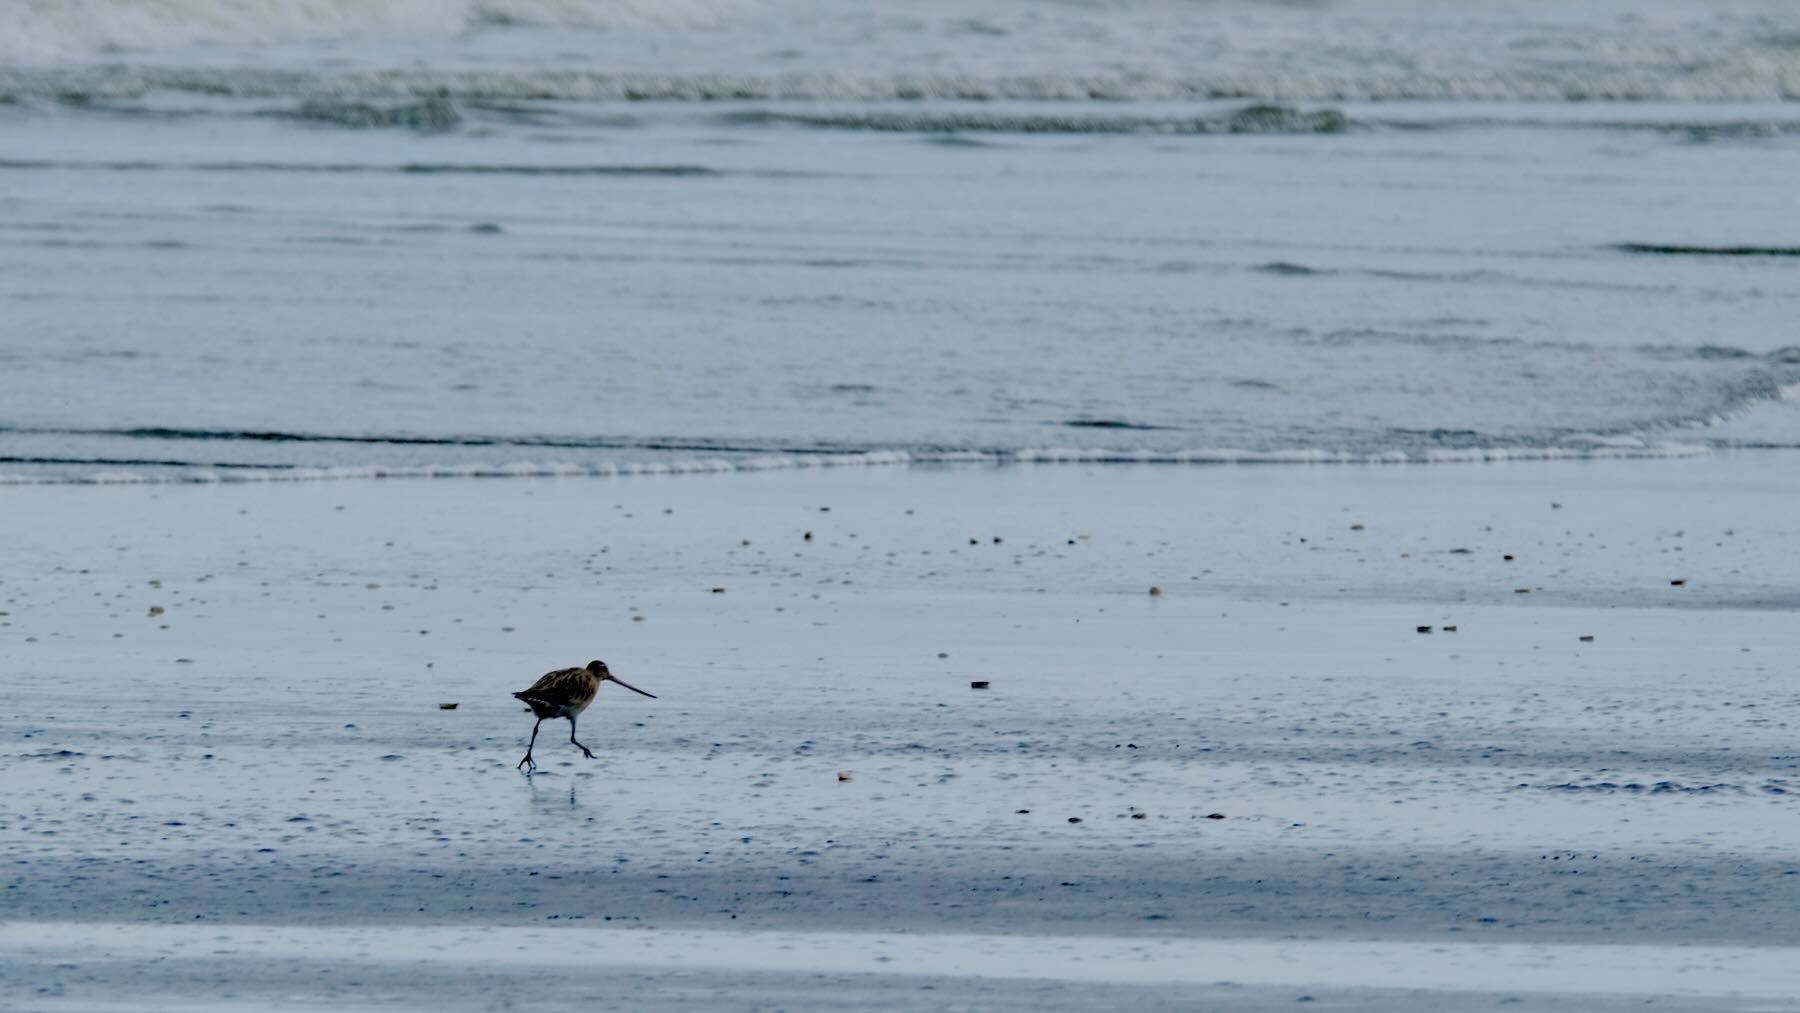 One long-beaked wading bird in the beach shallows. 